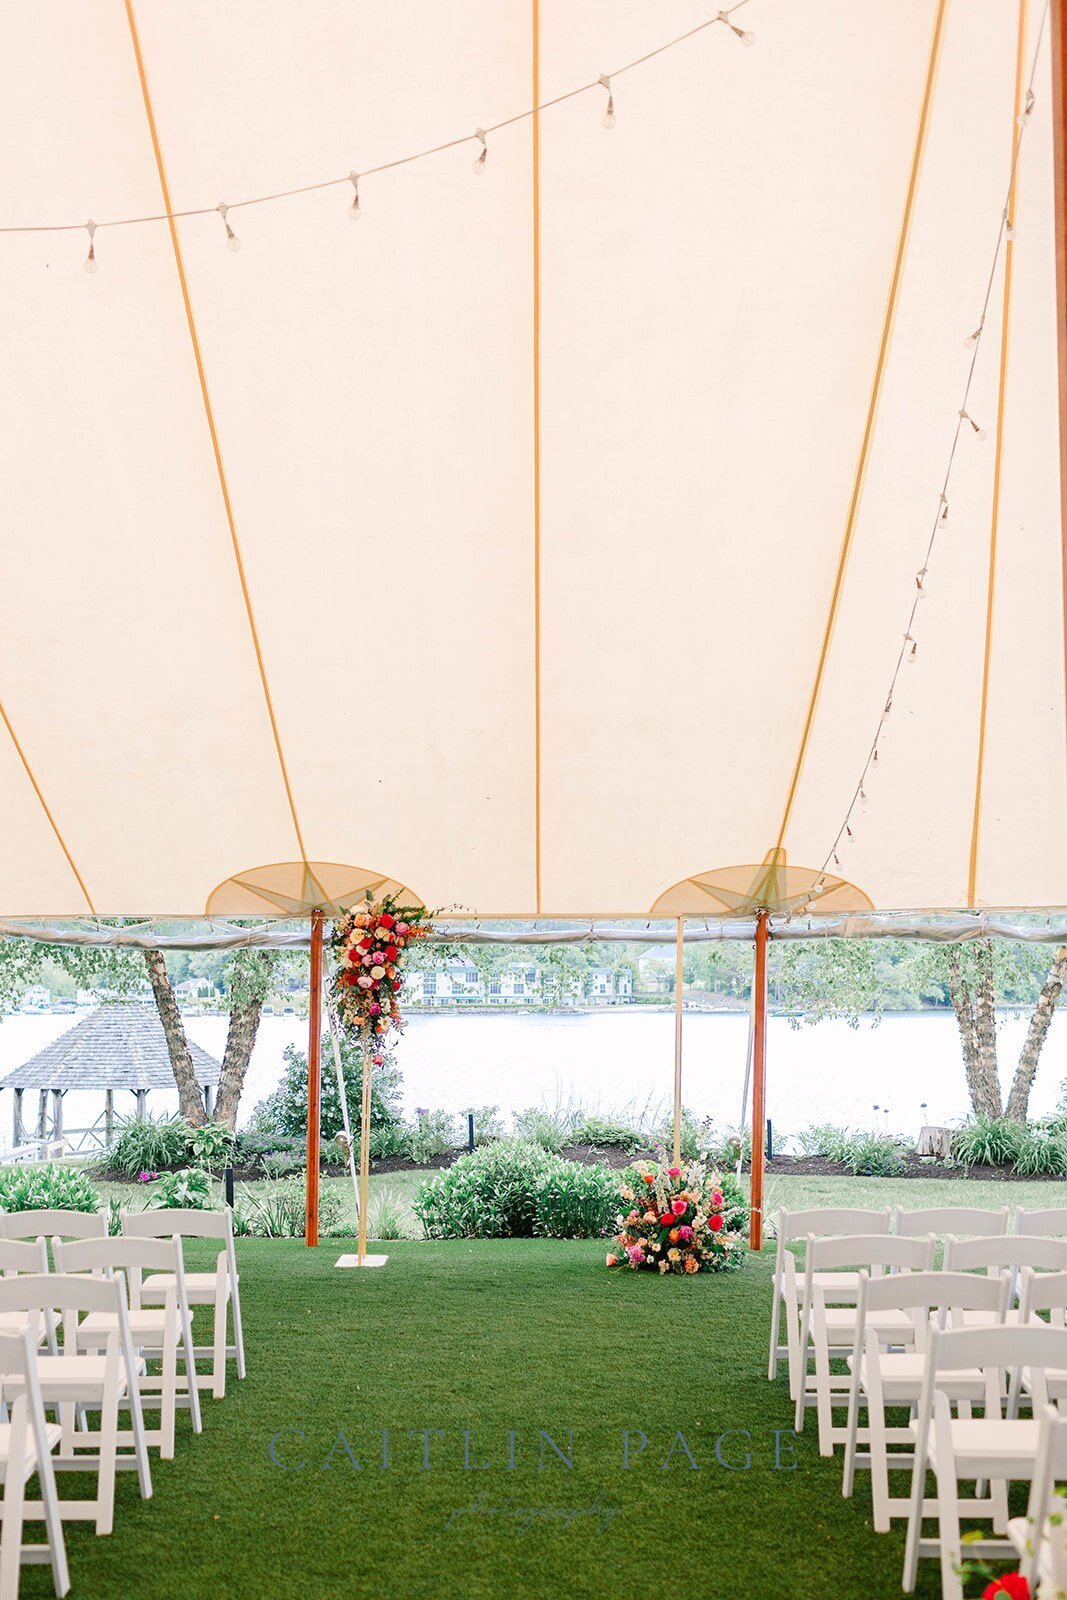 Lakeside ceremony in Meredith under the tent